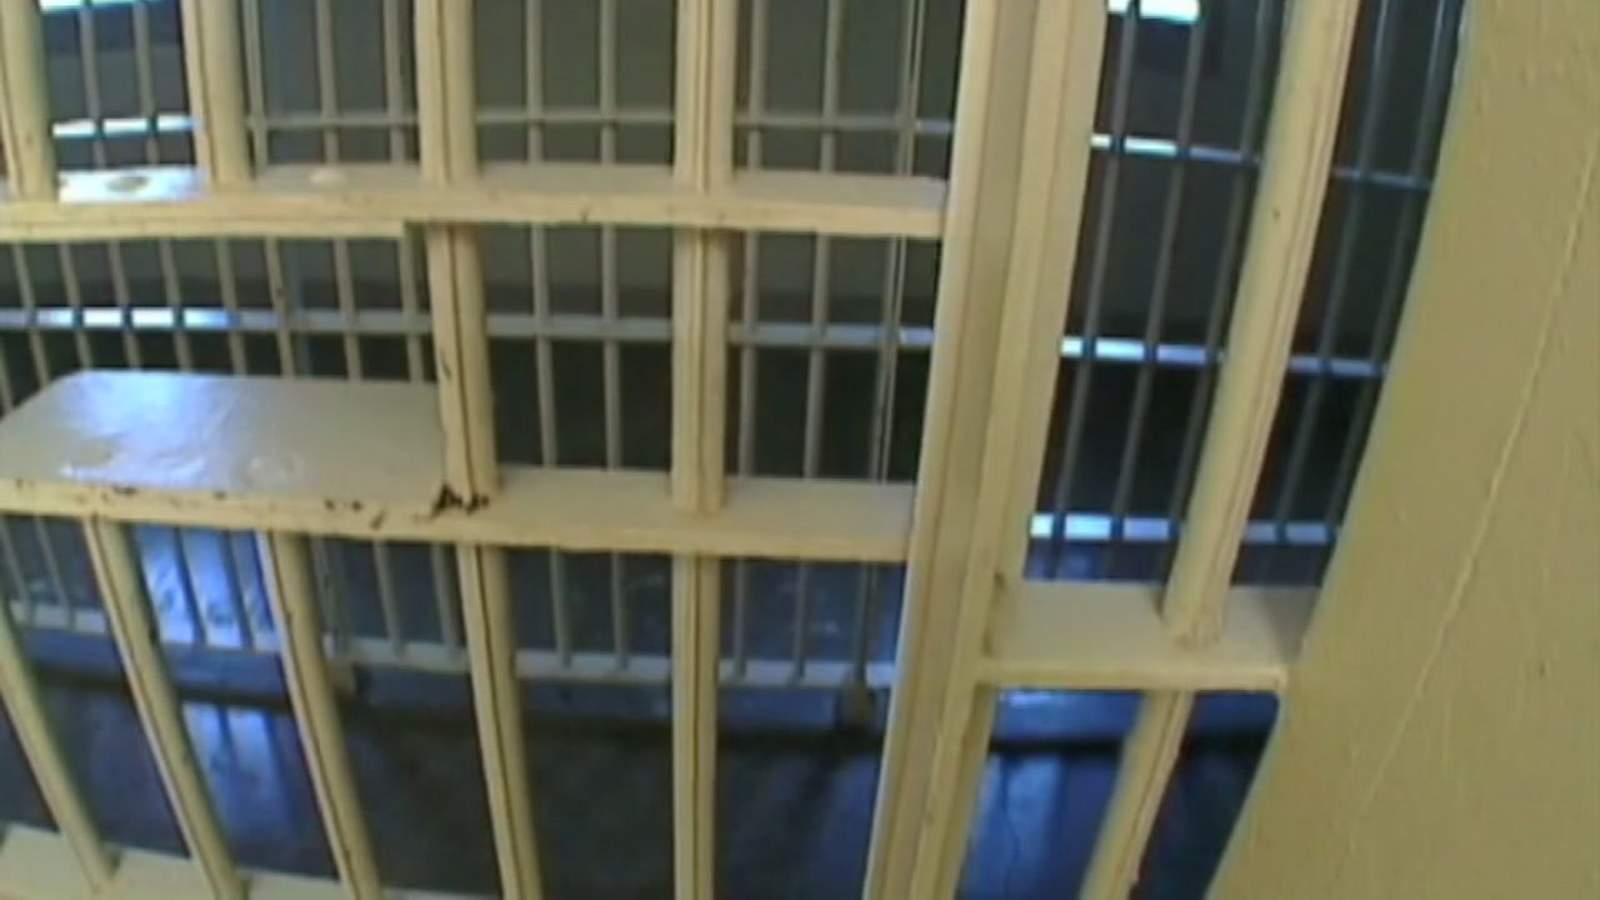 Florida inmate mistakenly released from jail on his birthday